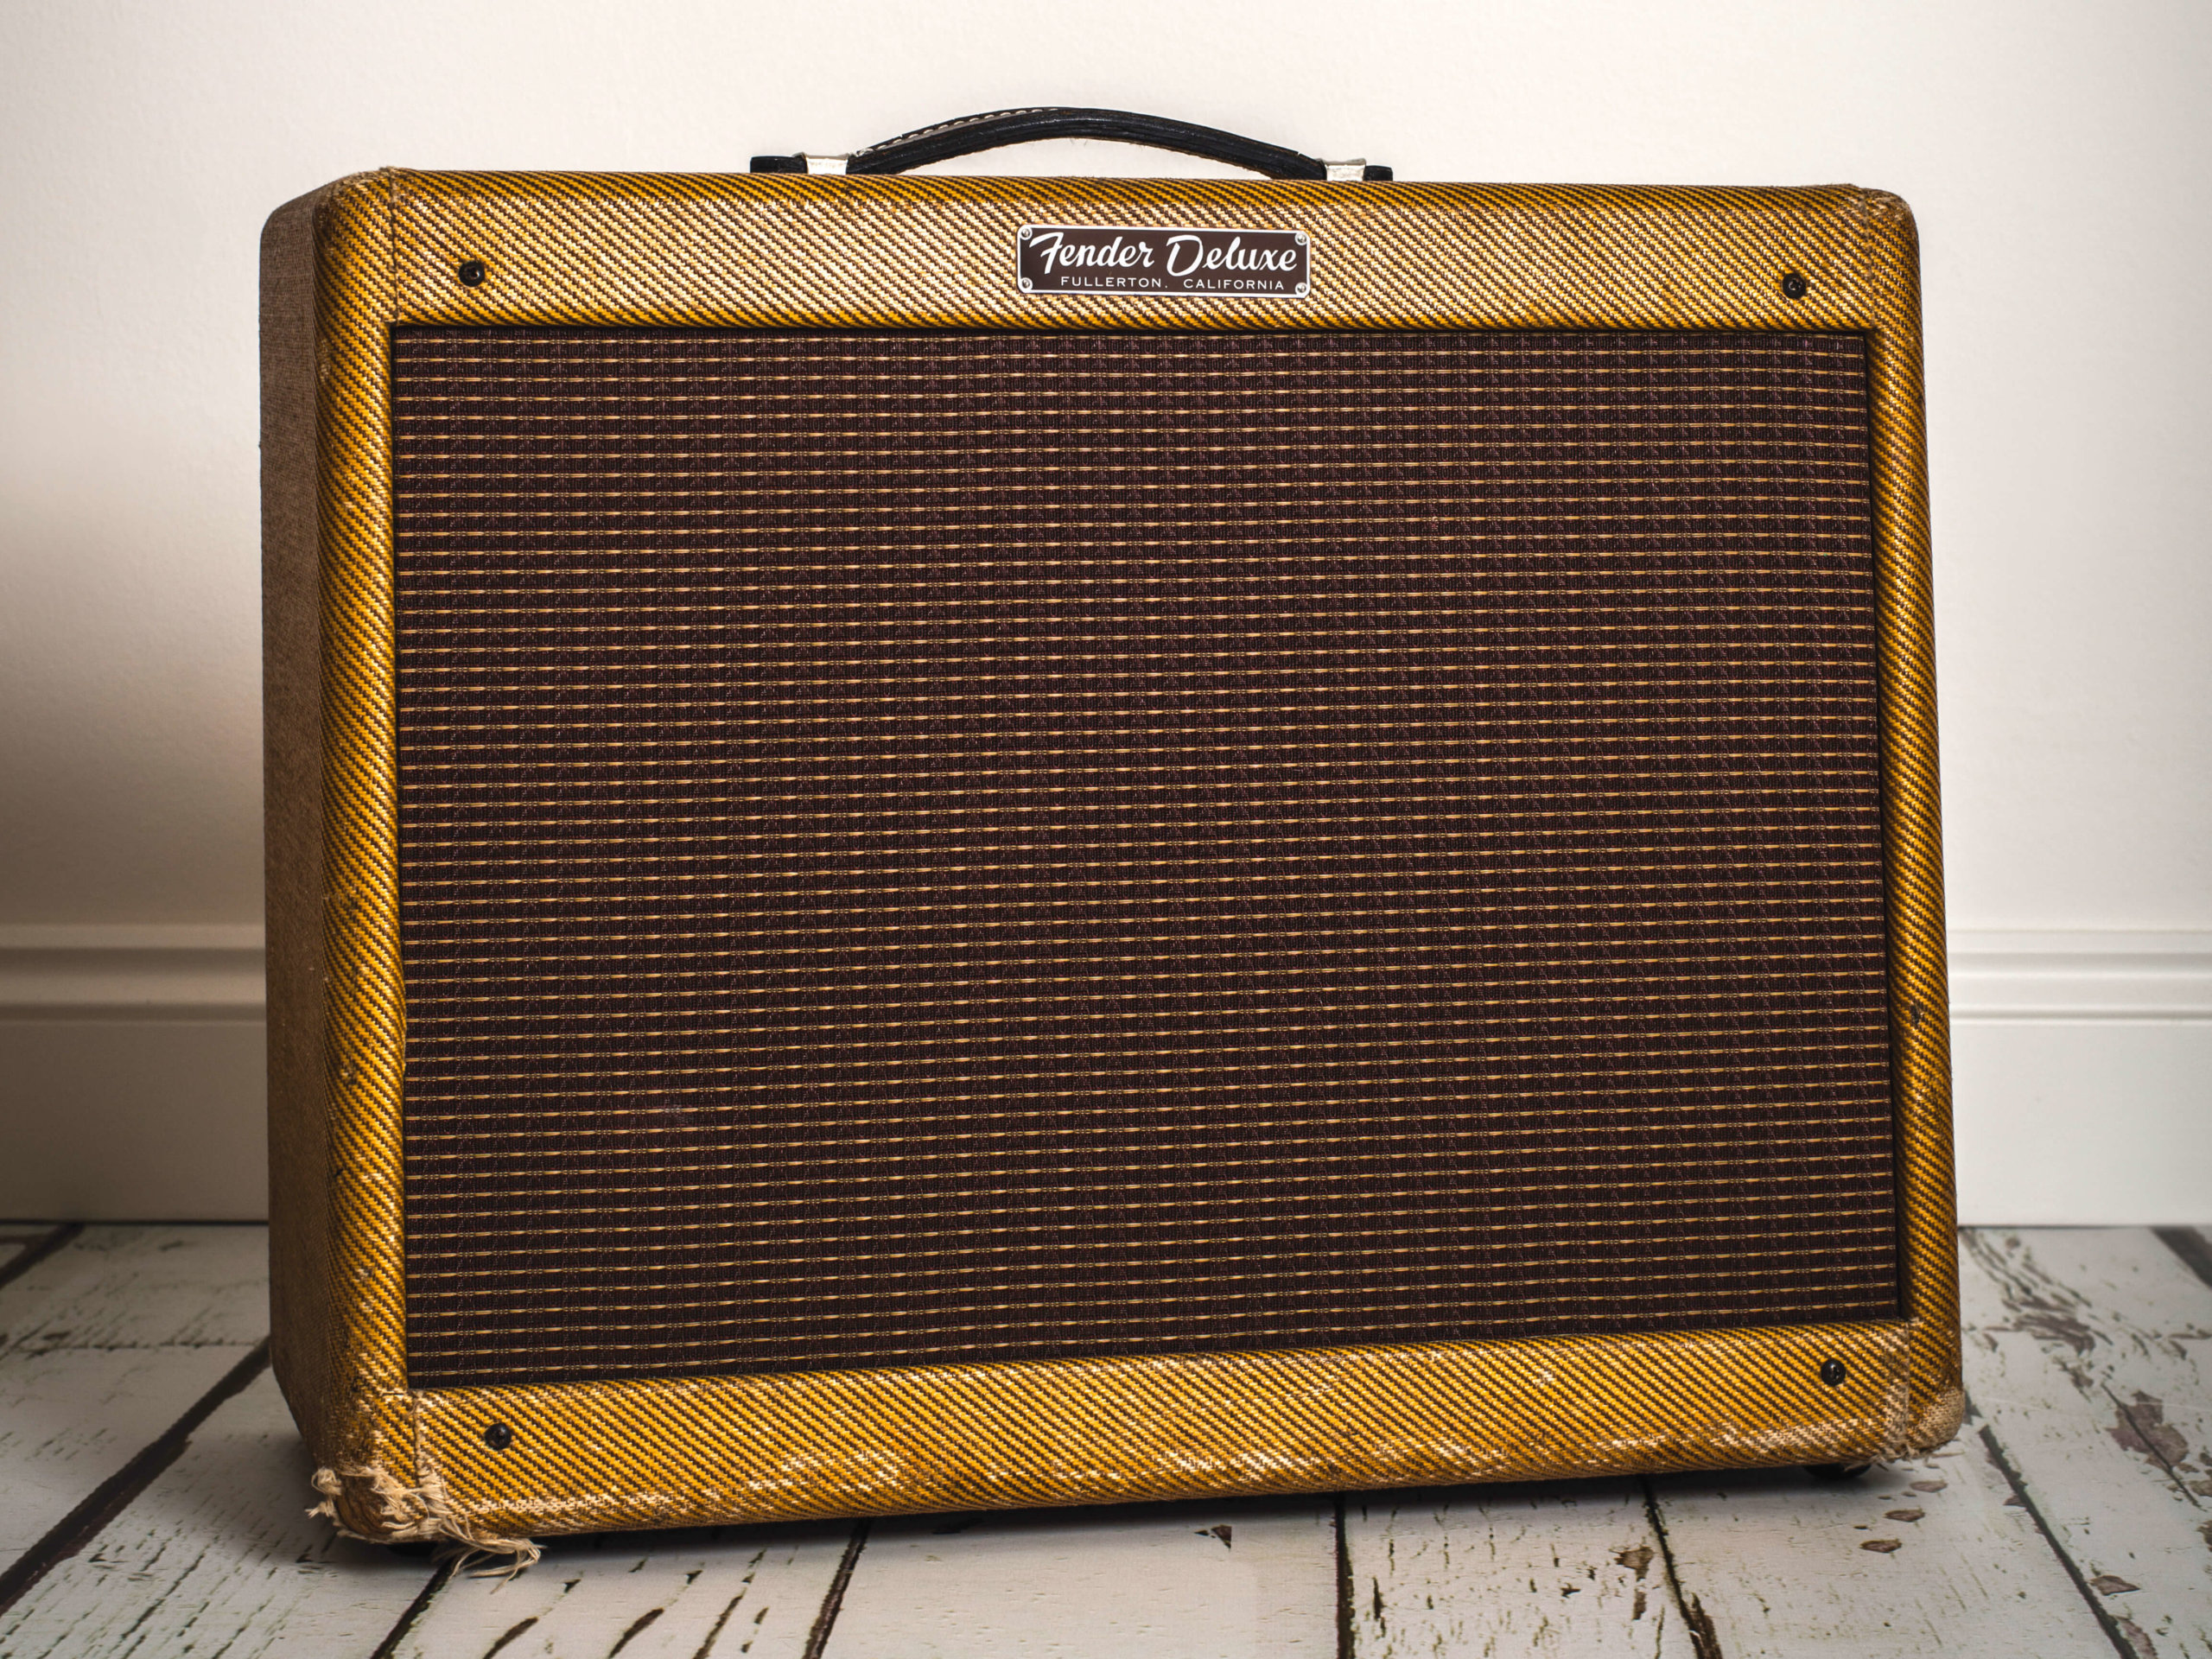 You Ask: What do I look out for when acquiring a tweed amp?